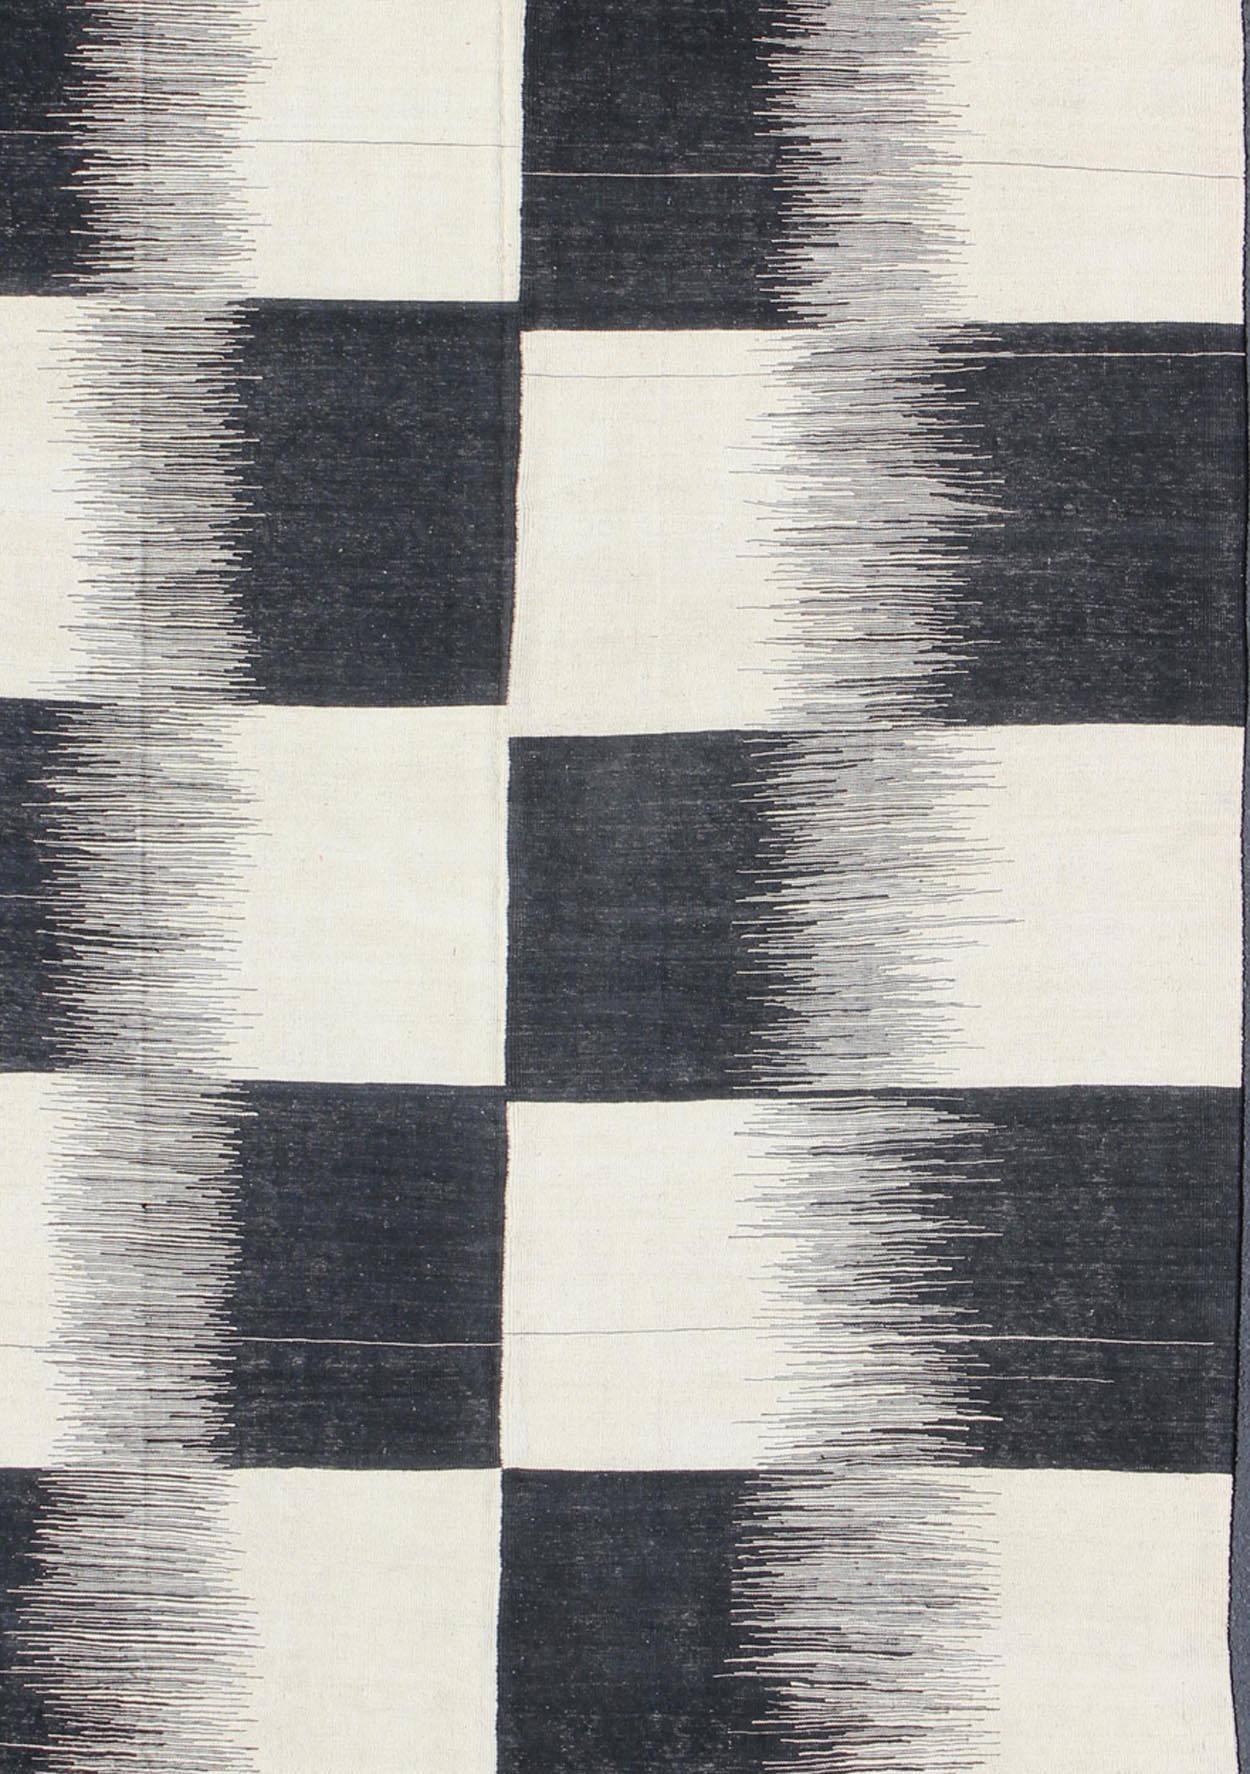 Afghan Modern Kilim Rug with Black, White, and Gray Large Block and Checkerboard Design